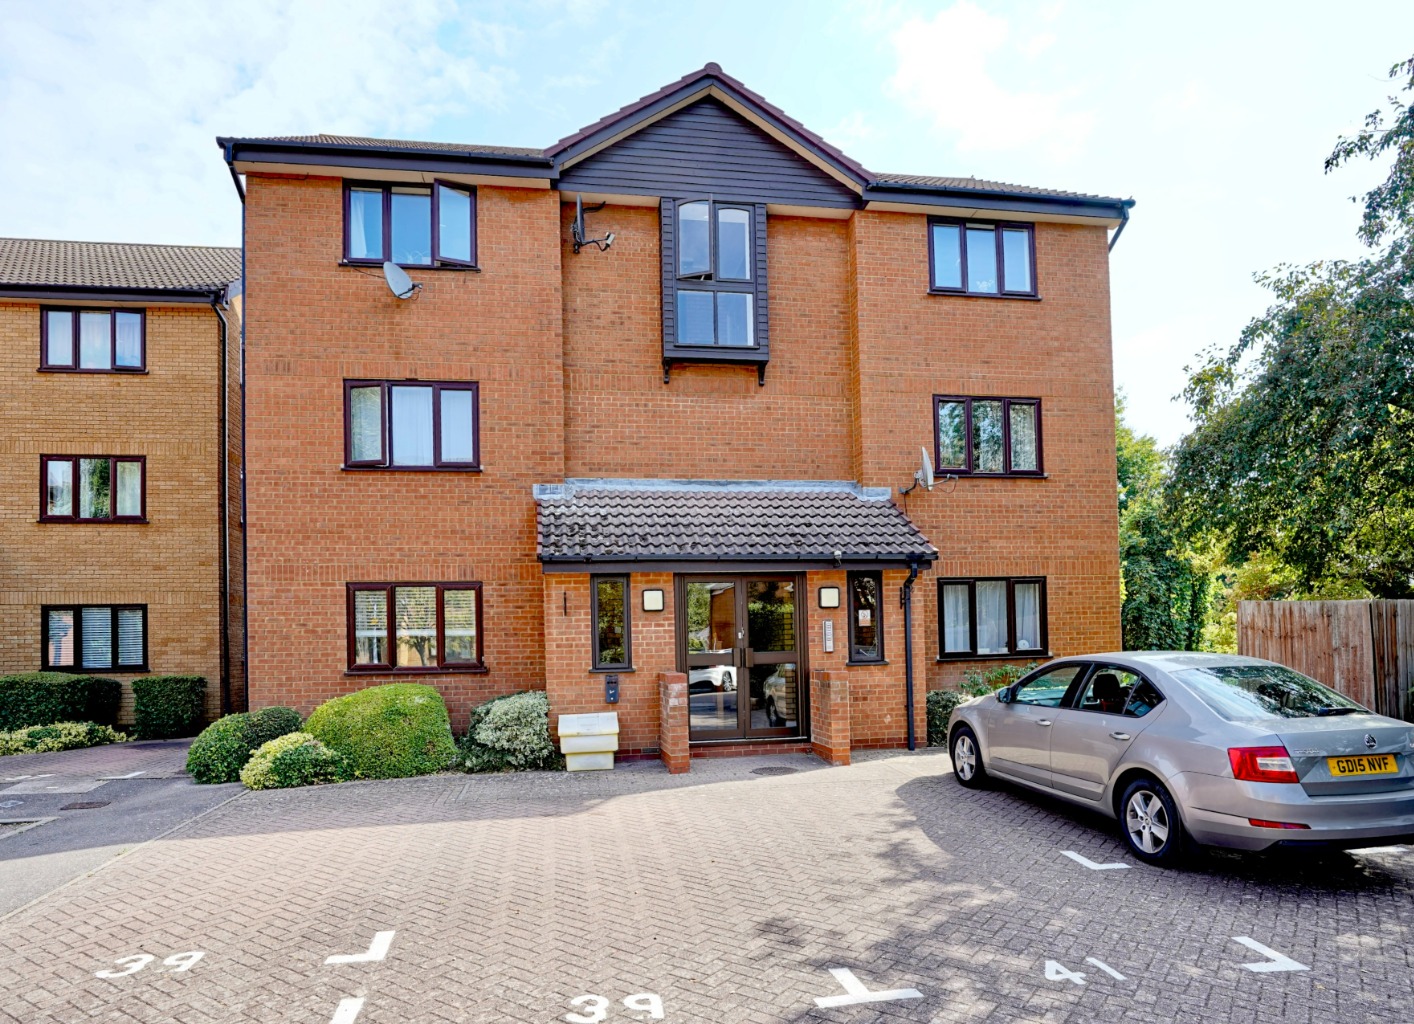 2 bed flat for sale in Ullswater, Huntingdon - Property Image 1